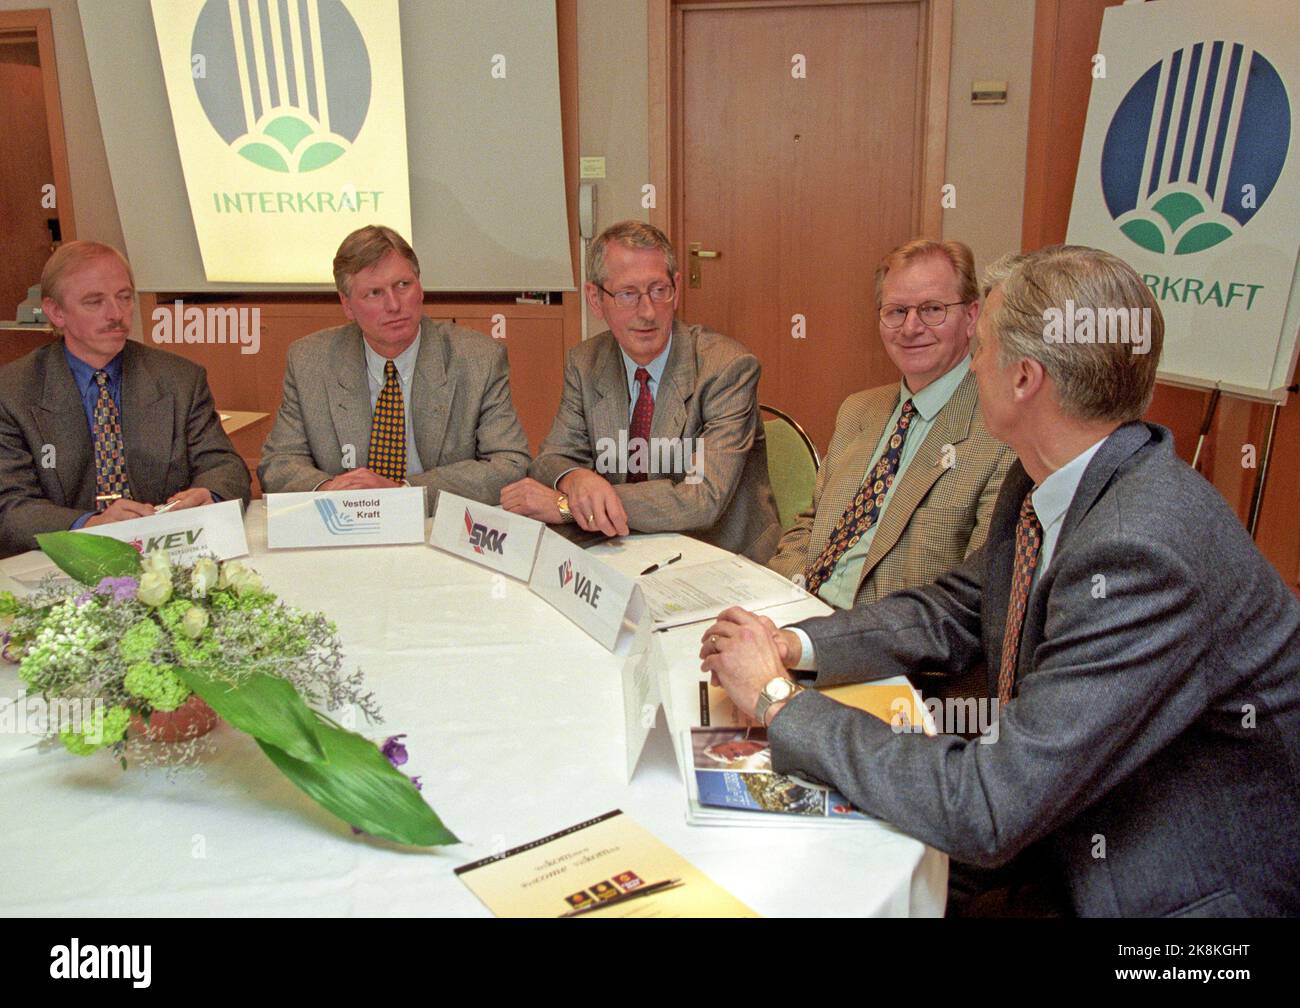 Oslo 19980324. Five of Norway's largest energy plants today join in to form Norway's first power chain. The Interkraft group thus becomes one of the largest players in the Norwegian electric power market. From right to left: CEO. Knut C. Gjermundsen (AAK), CEO. Fred Sæther (VAE), CEO. Wilhelm Rondeel (SKK), CEO. Hans August Hansen (Vestfold Kraft), CEO. Jan Pedersen (Kristiansand Energiverk). Photo: Berit Roald / NTB Stock Photo